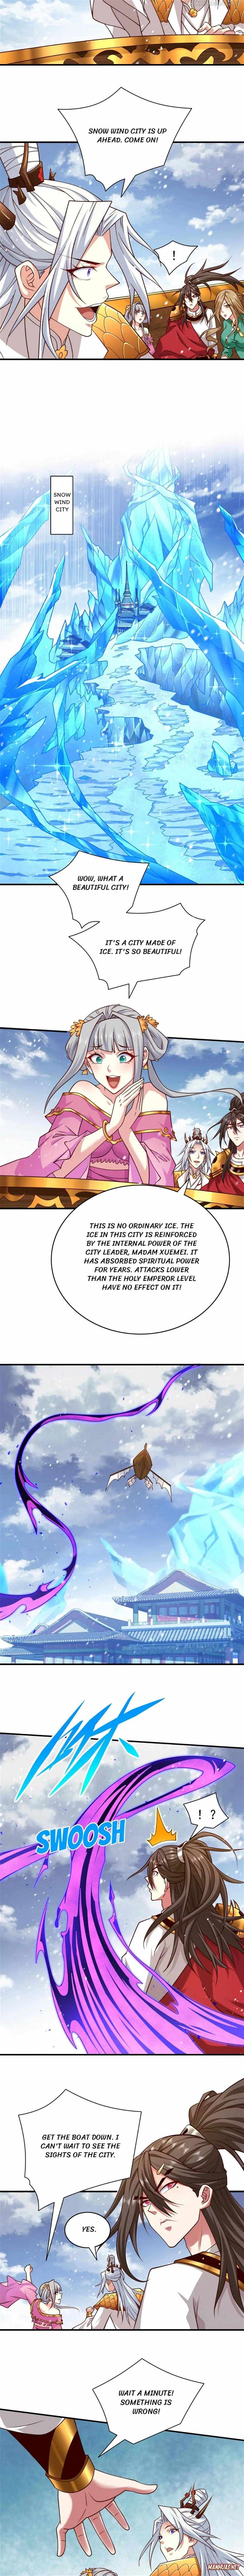 99 Ways to Become Heroes by Beauty Masters Chapter 182 page 3